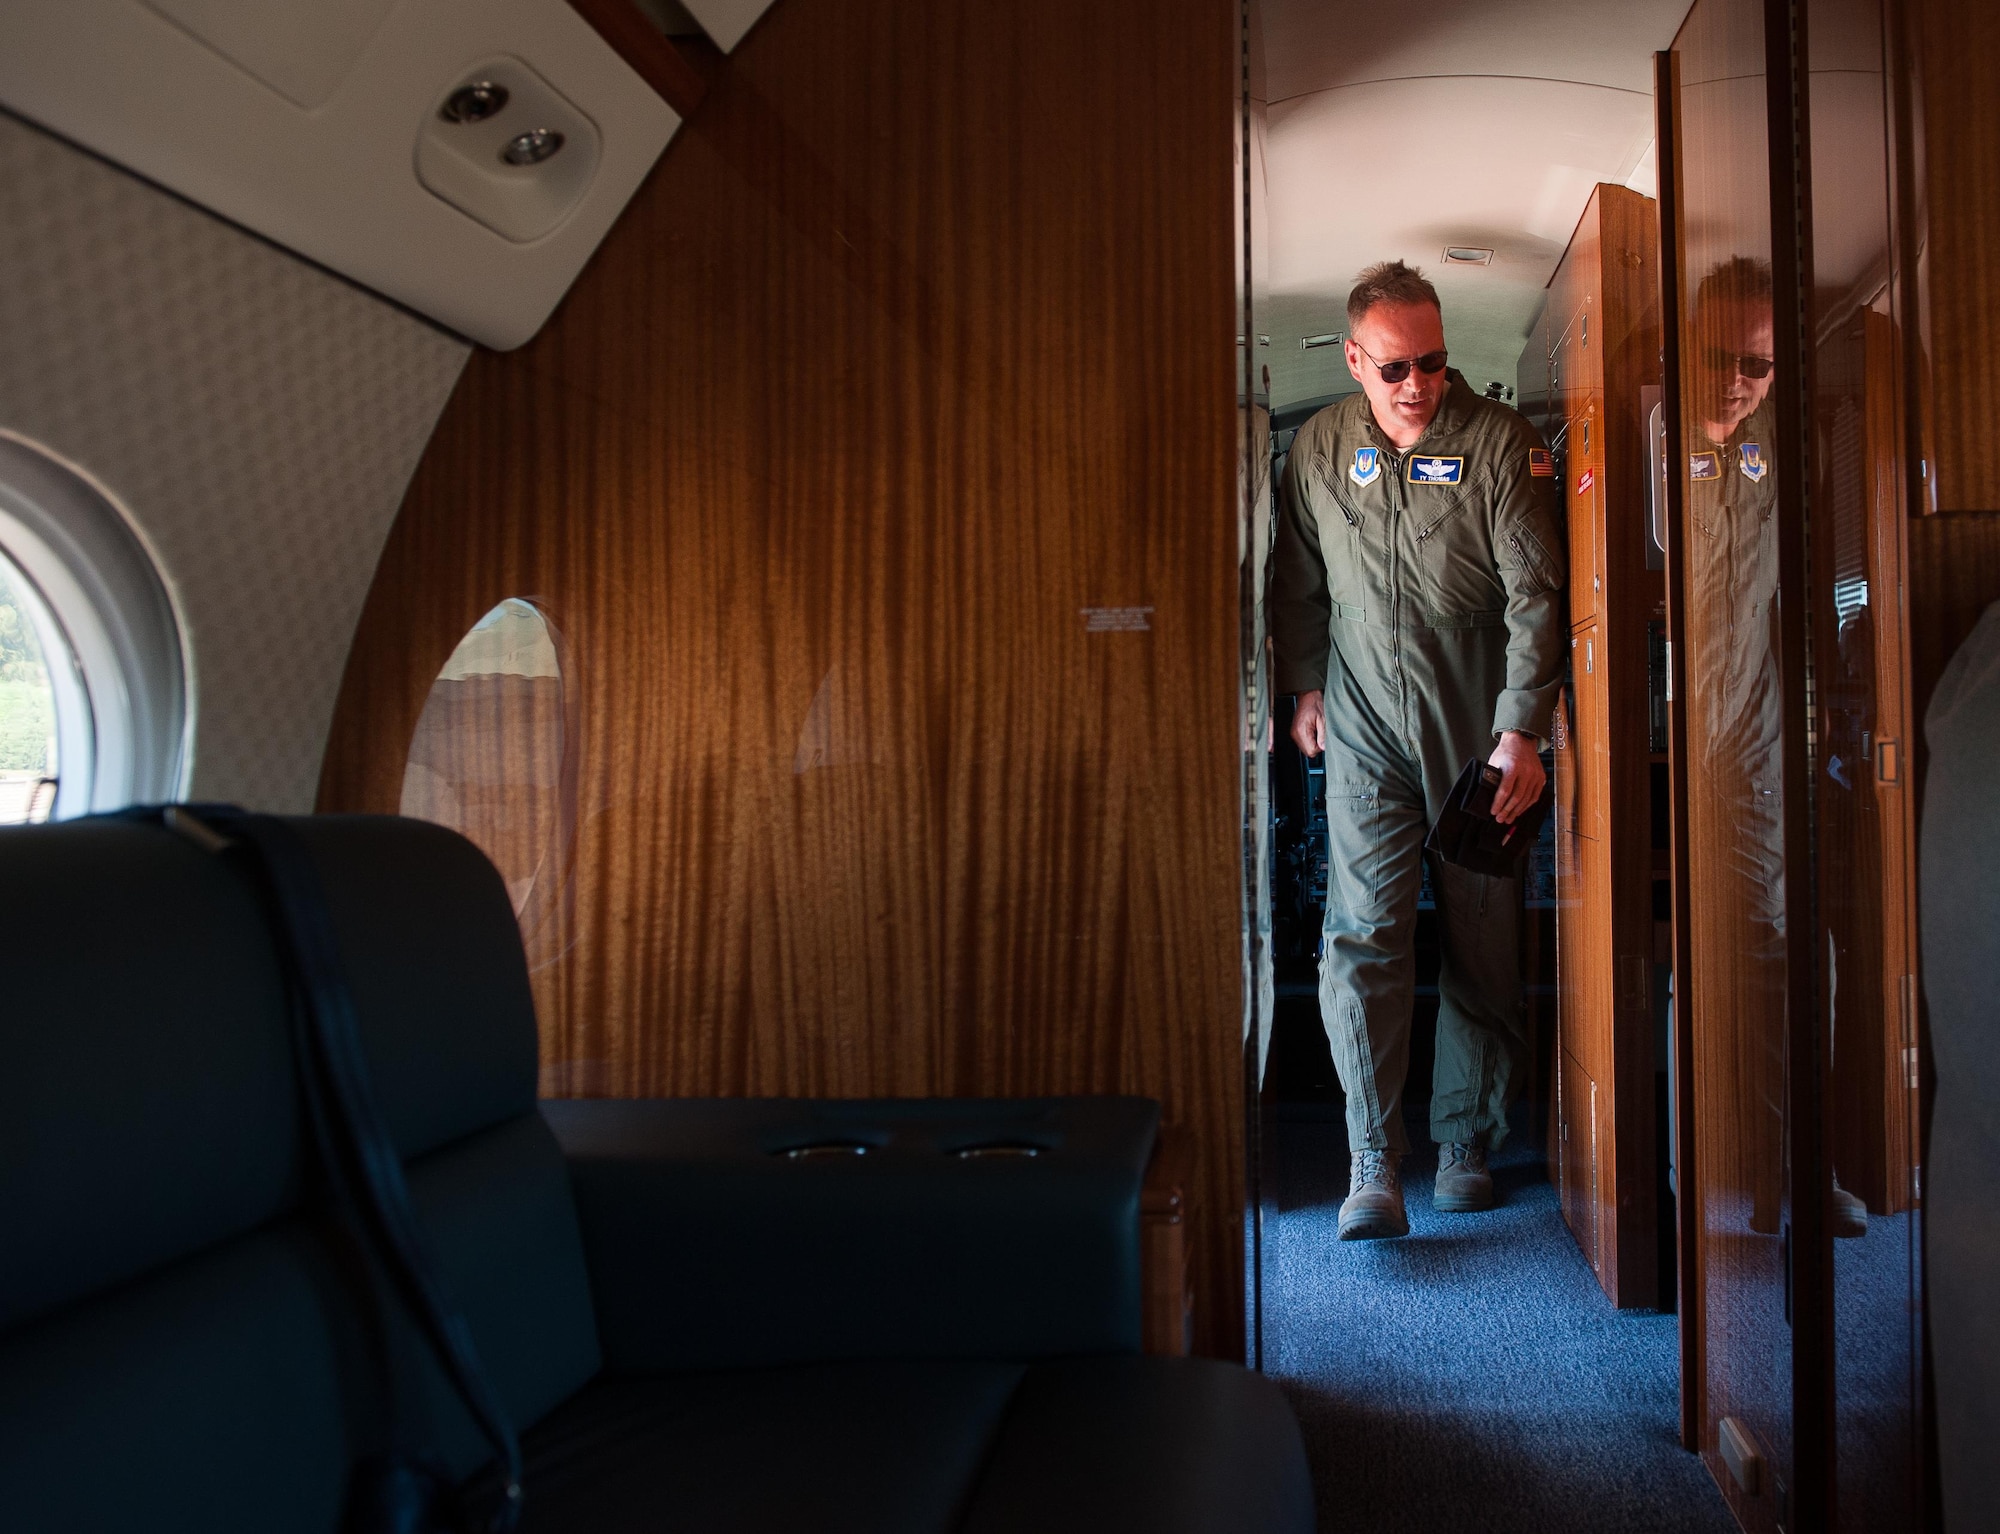 Brig. Gen. Jon T. Thomas, 86th Airlift Wing commander, exits a C-37A during his final flight July 19, 2016, at Ramstein Air Base, Germany. The “fini flight” is part of a tradition for flyers dating back to World War II, where they fly aircraft they’ve come to know for one last time as they prepare to move to their next assignment. (U.S. Air force photo/Airman 1st Class Lane T. Plummer)